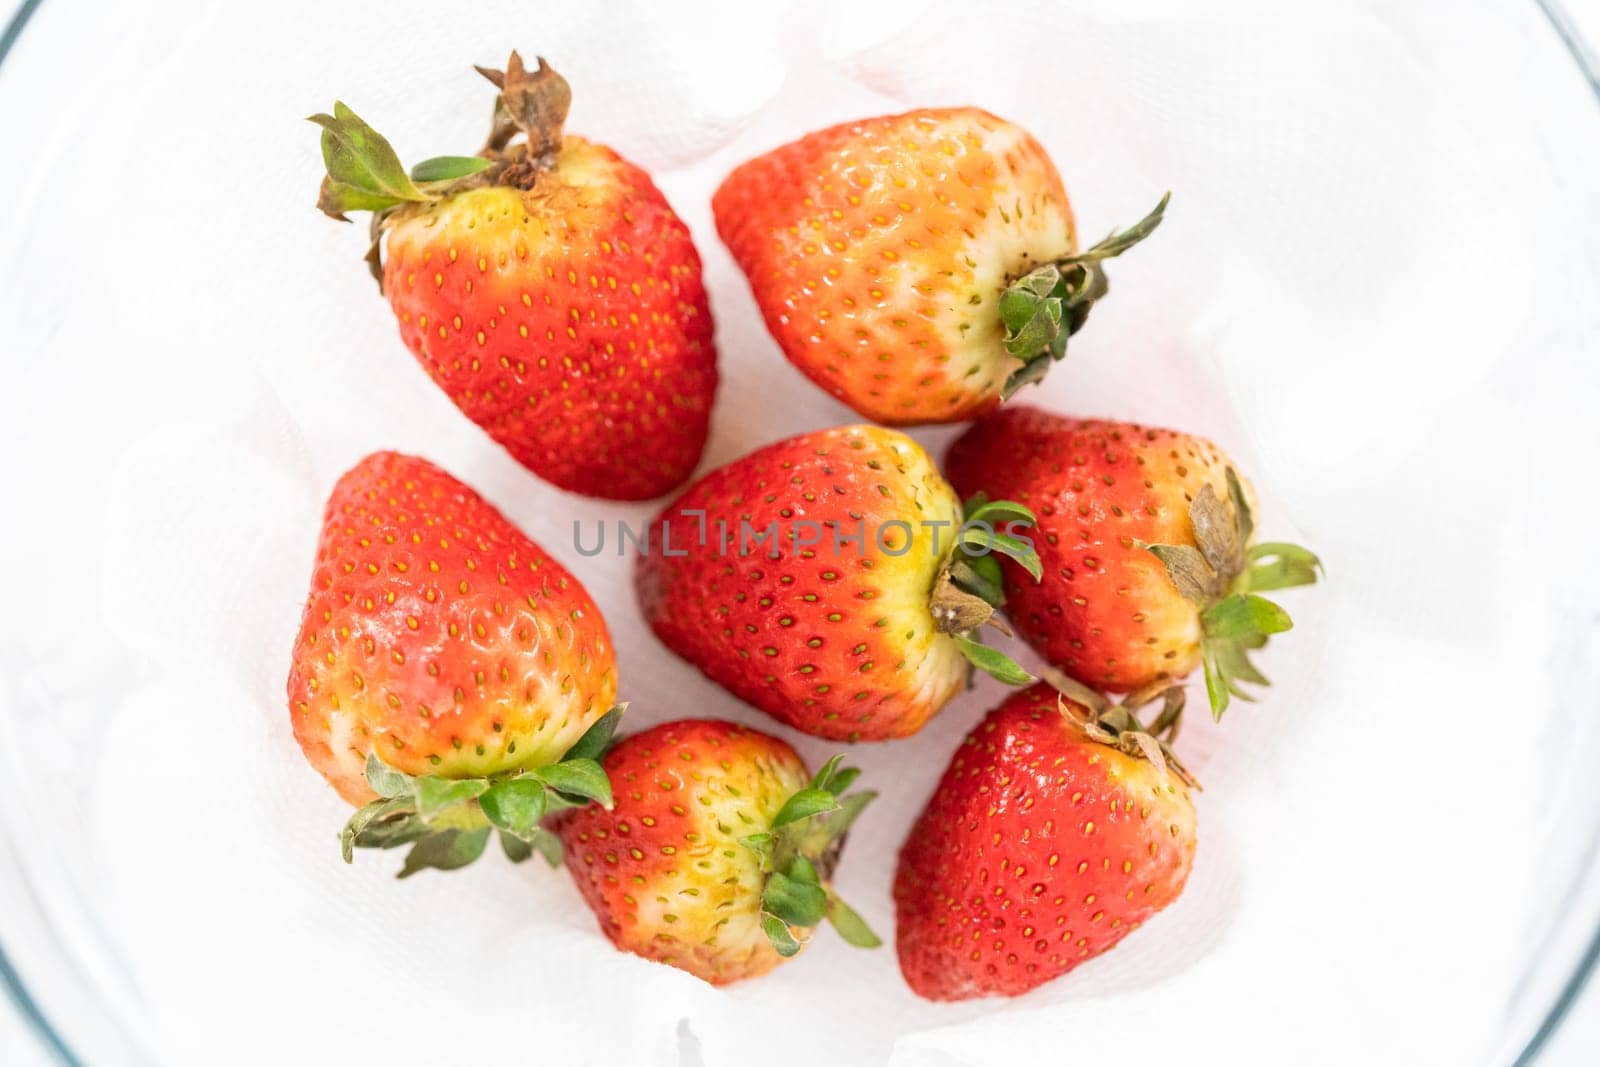 Freshly washed and dried strawberries are carefully arranged in a glass bowl lined with paper towel, ready for snacking or further use.